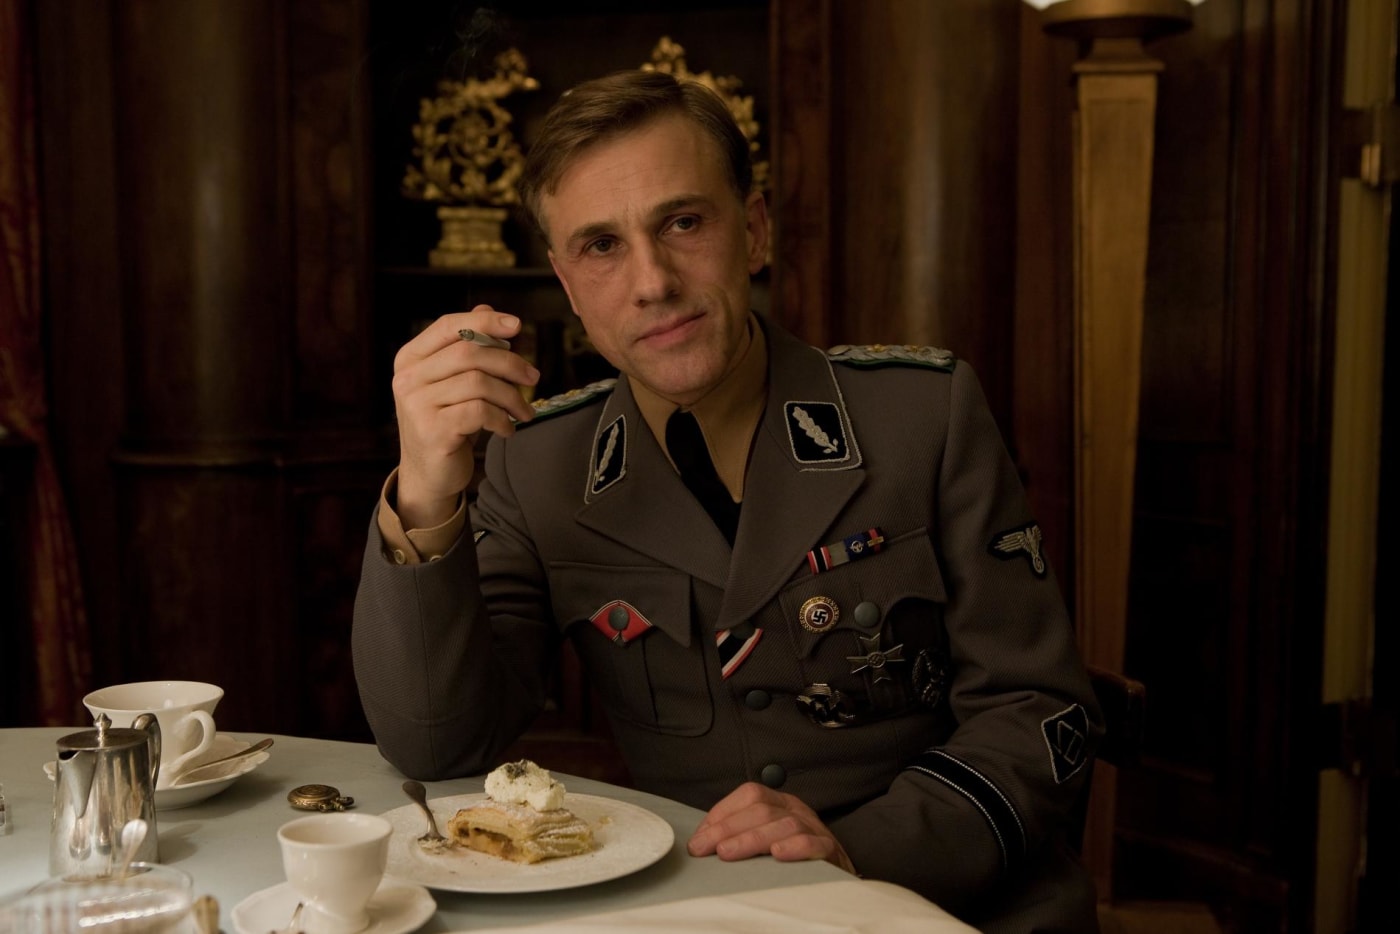 Christoph Waltz as Hans Landa, considered to be one of the greatest casting choices in recent history.